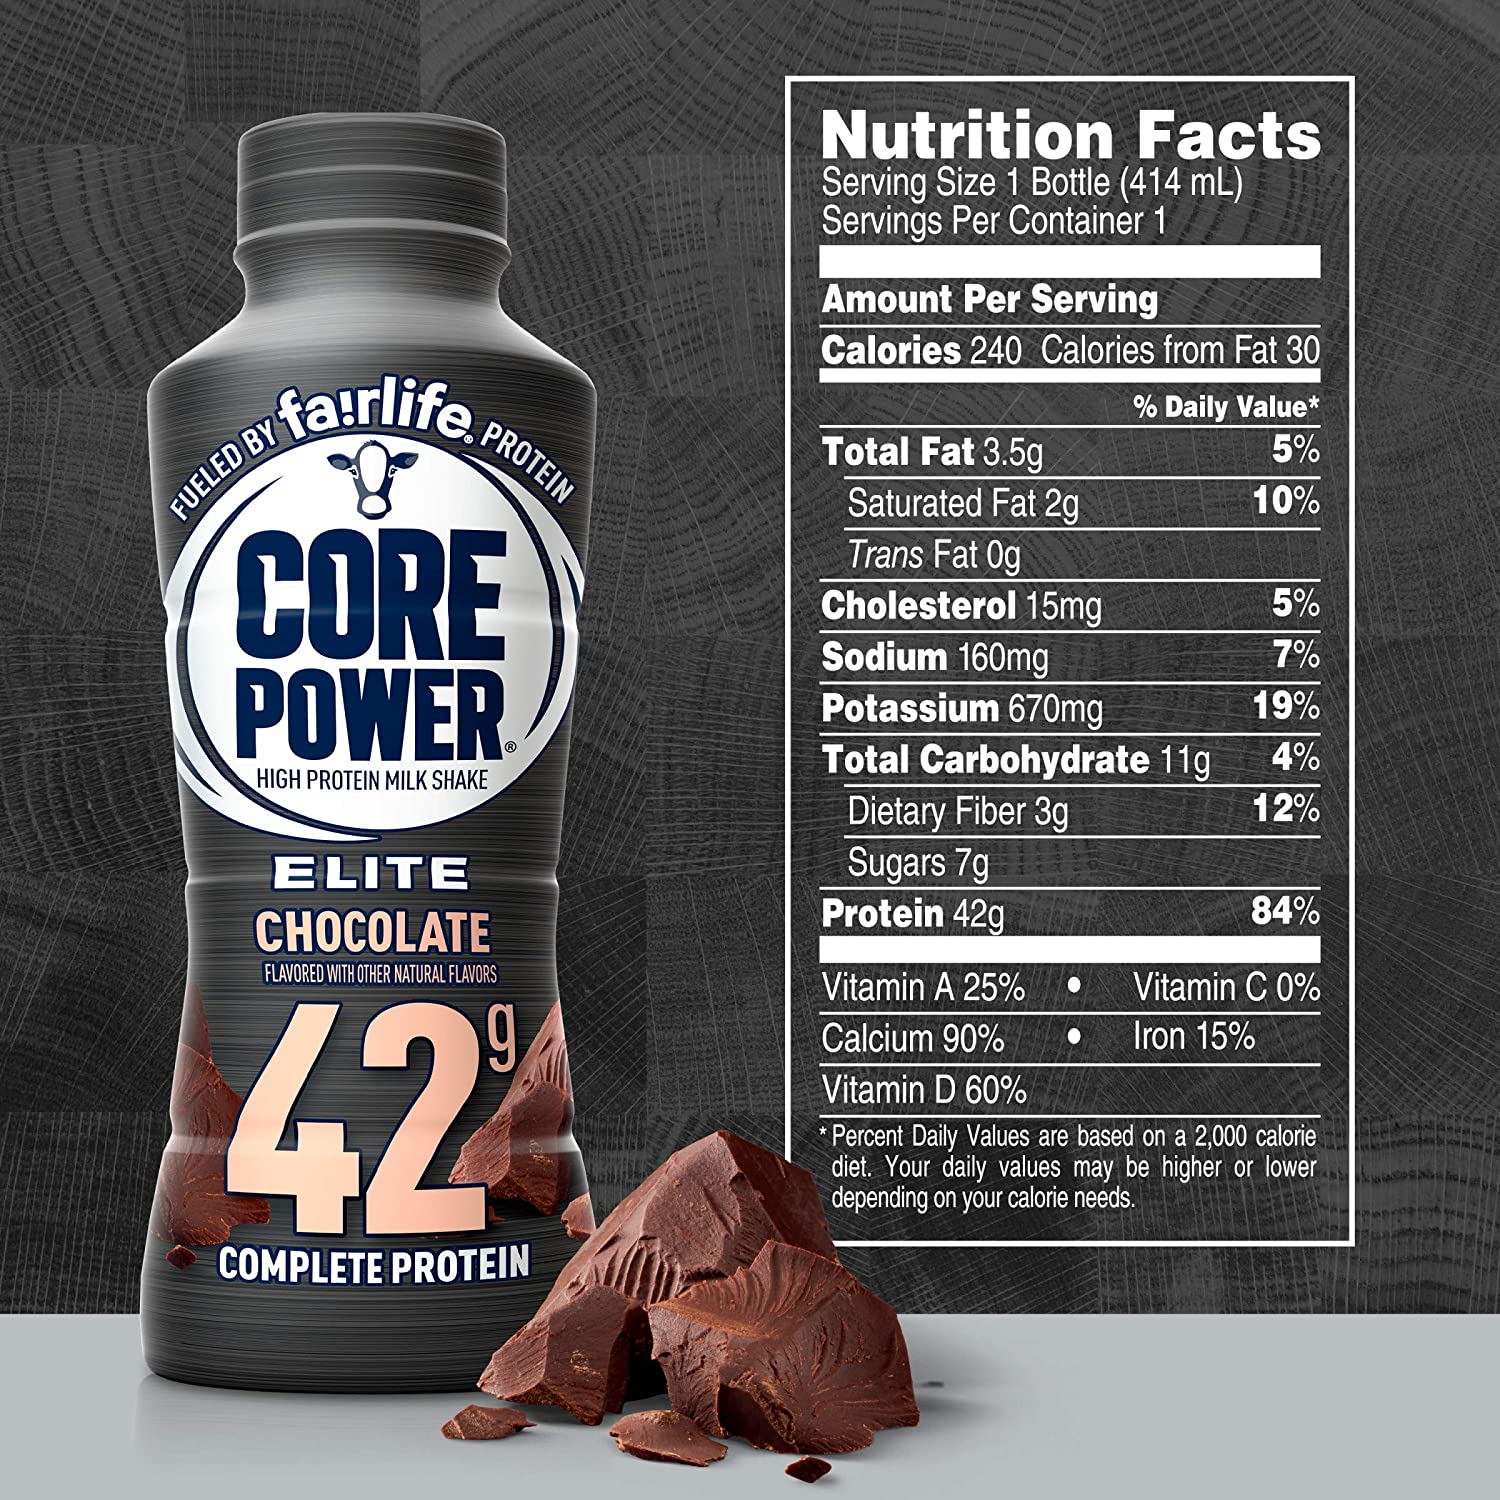 Fairlife Core Power (42g) High Protein Shake, Elite Chocolate / 414ml, Pack of 12, Nutrition facts, SNS Health, Sports Nutrition